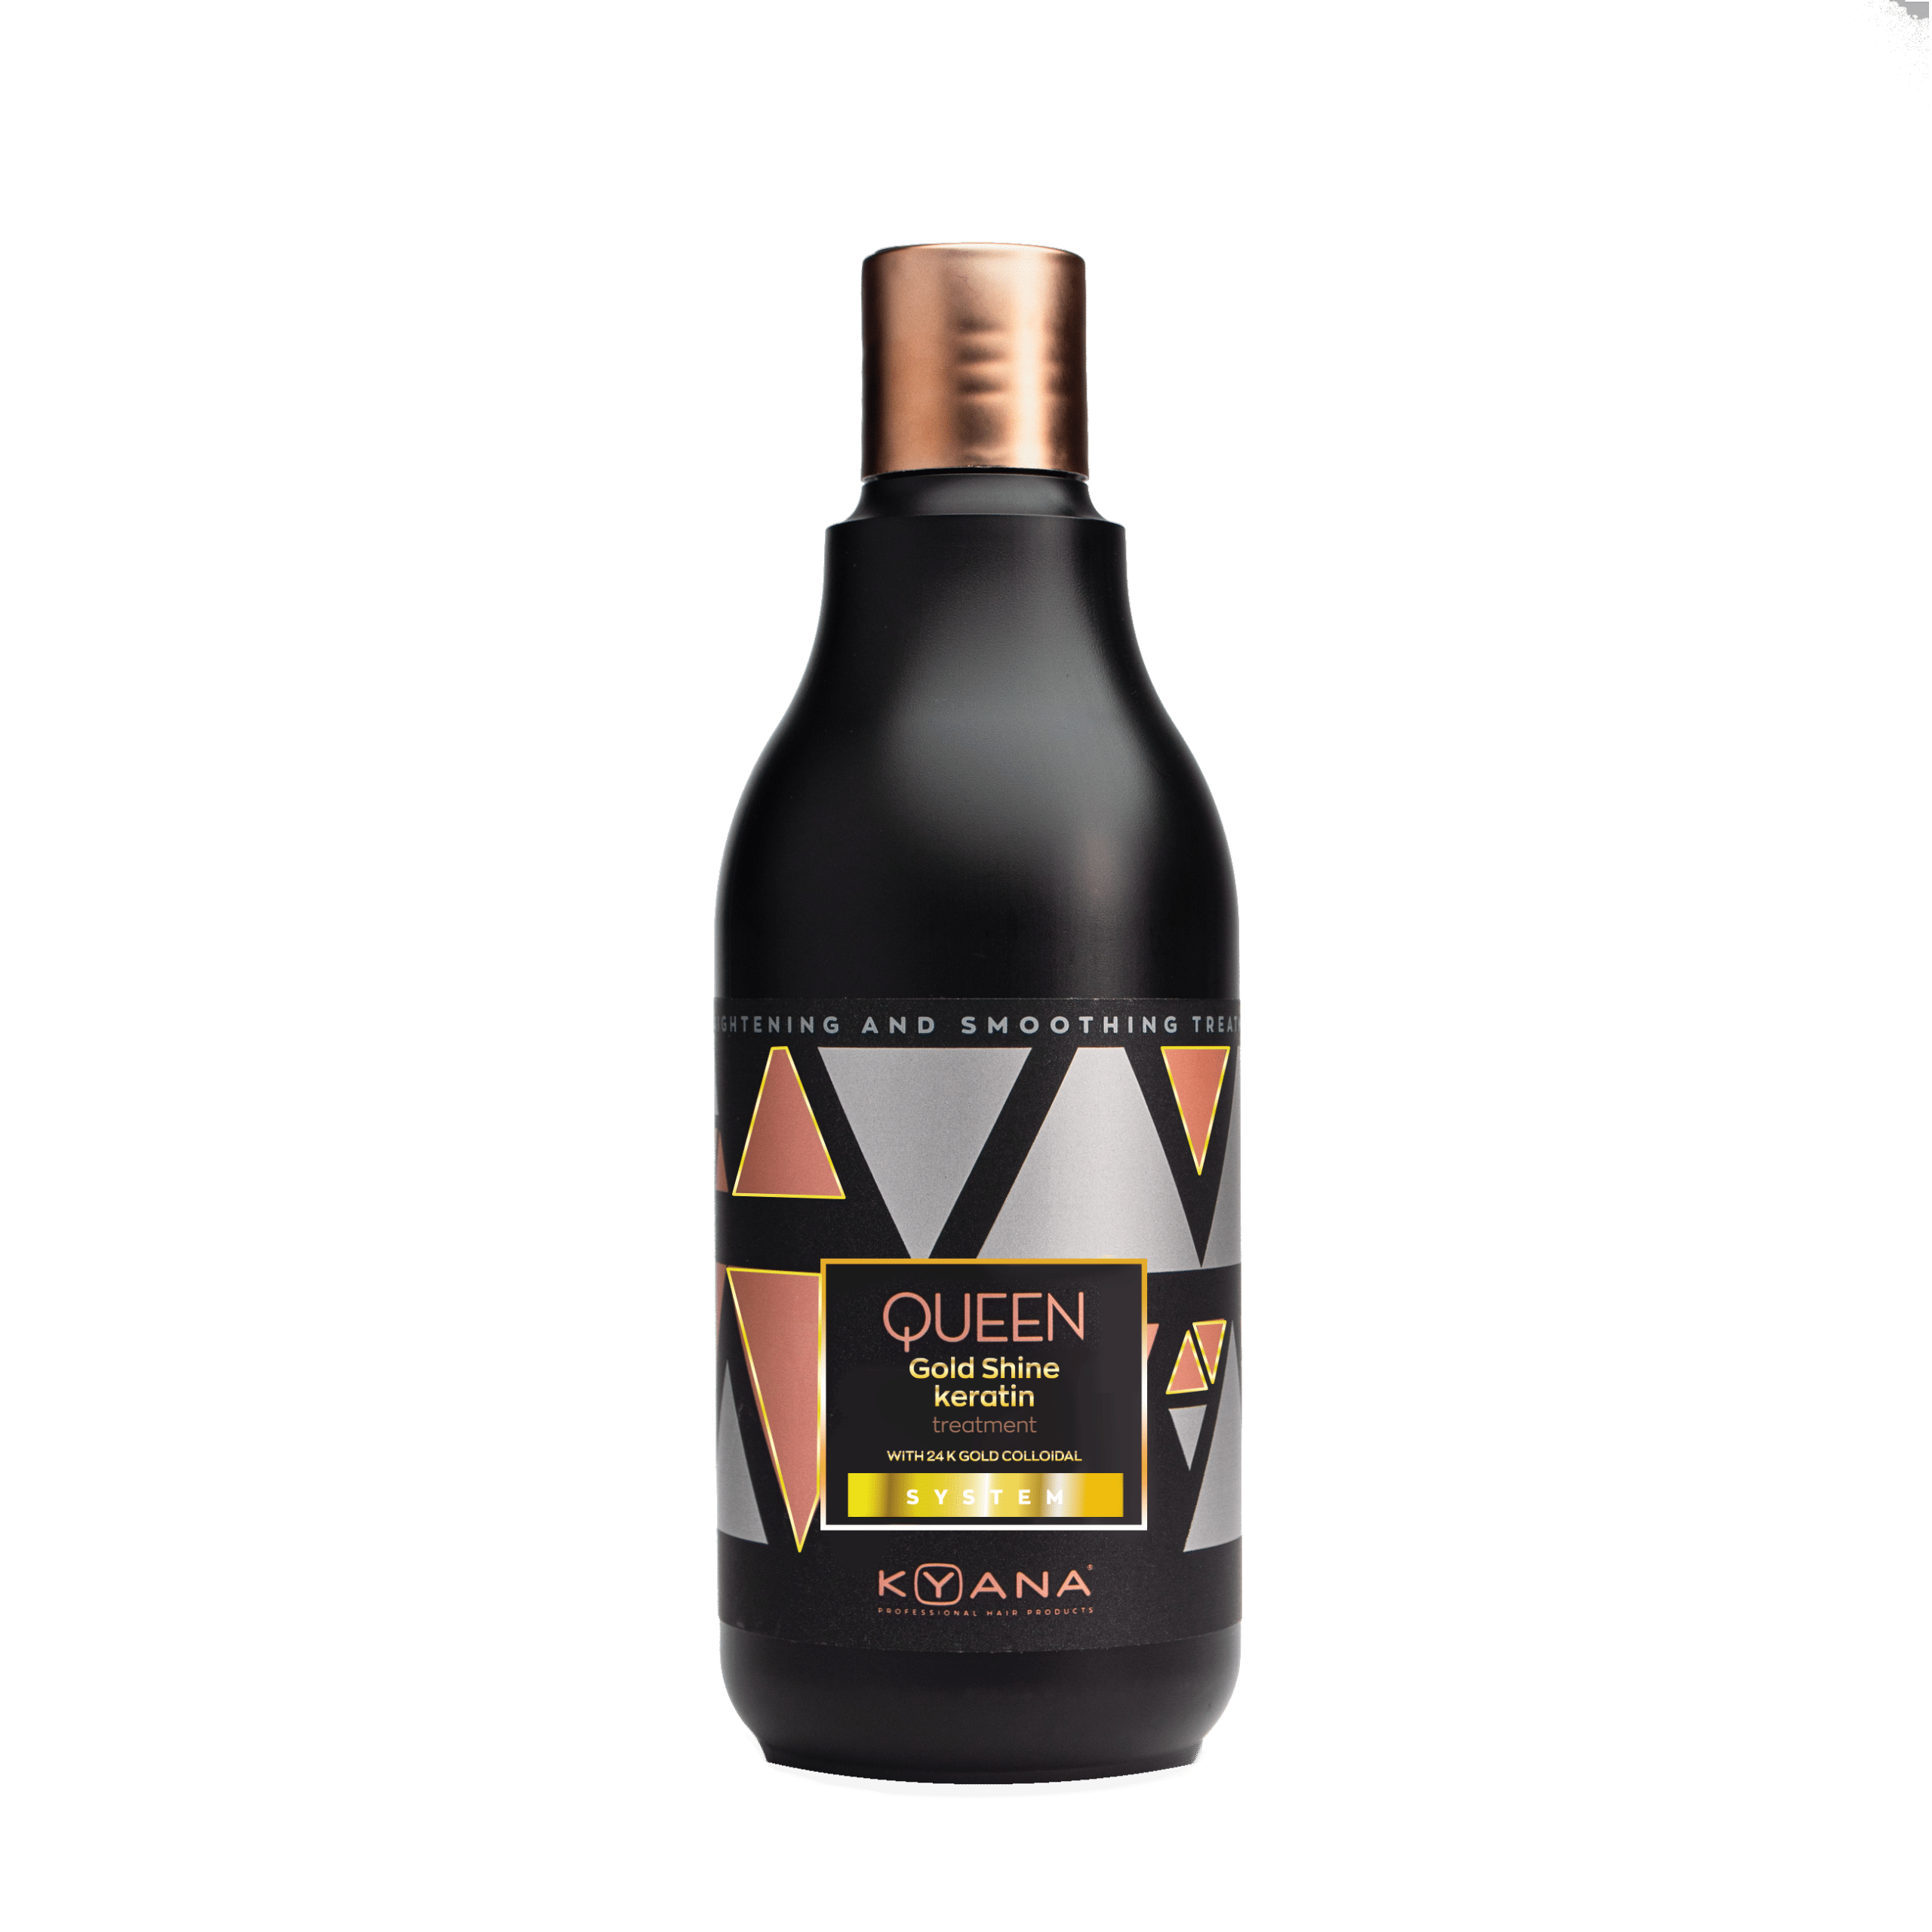 Queen Gold Shine Keratin 250ml ΚΥΑΝΑ Professional Hair Products